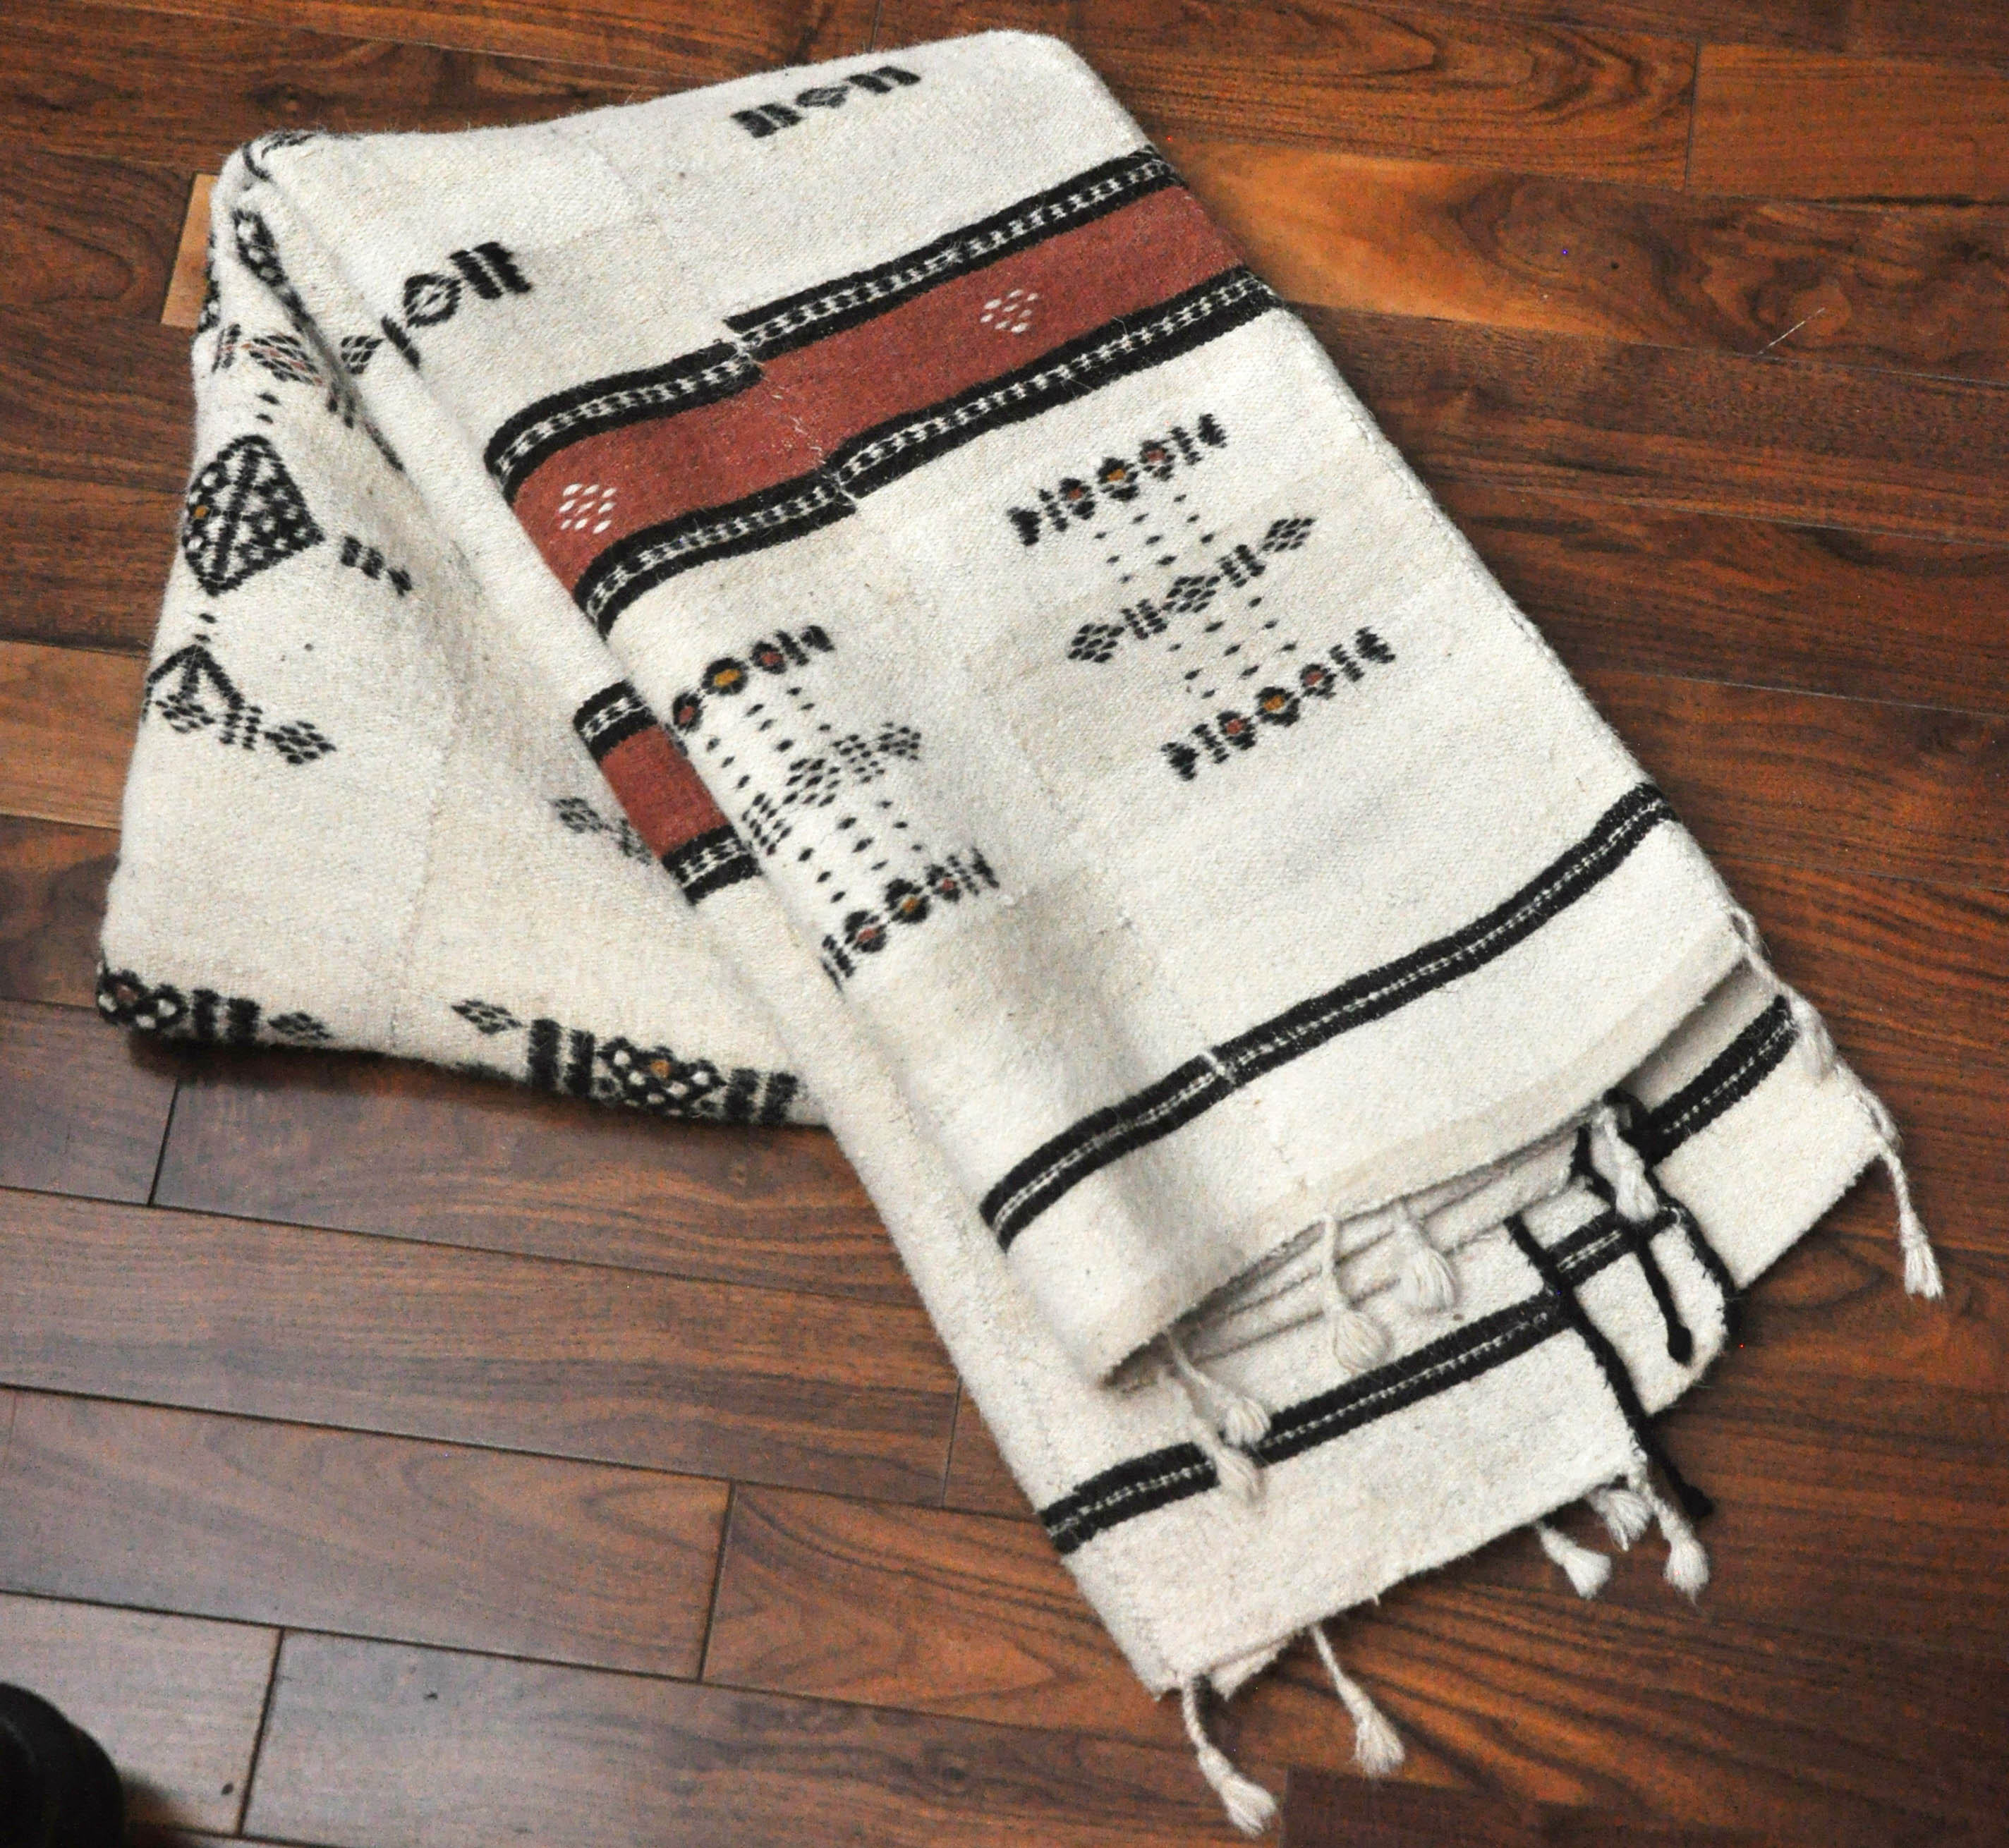 20th century white, black and faded red African textile 
Handwoven wool can be used as a rug or blanket. 
Beautiful geometric design 
Has been cleaned
From Africa.

Dimensions: 52